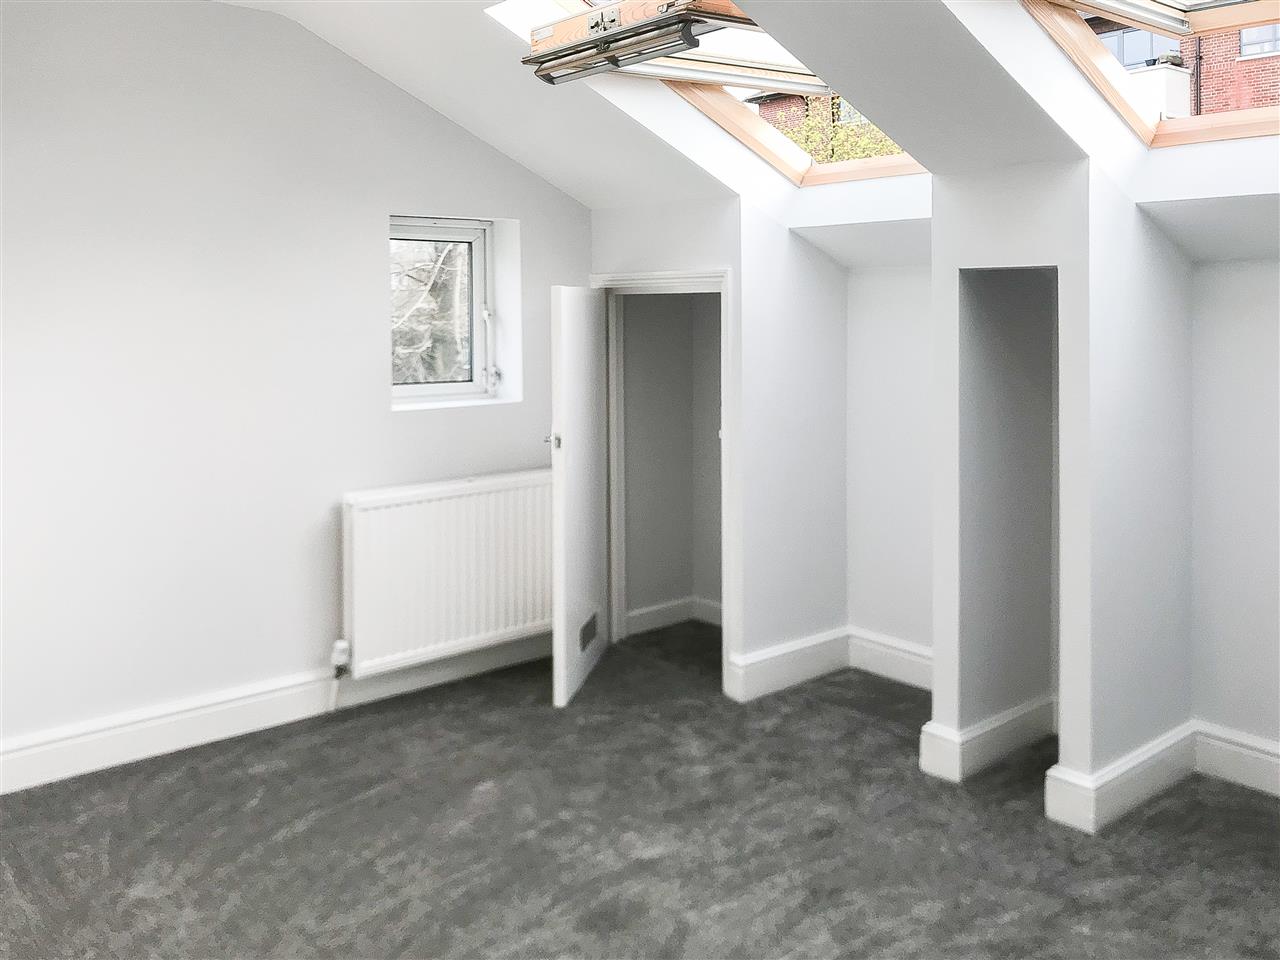 AVAILABLE IMMEDIATELY-RENT FIXED FOR 2 YEARS & WITH OPTIONAL DEPOSIT-FREE OPTION! A Newly decorated third Floor (top) UNFURNISHED flat in a popular tree lined turning close to the amenities and services of Tufnell Park including Tufnell Park Underground Station (Zone 2-Northern Line), Tufnell ...